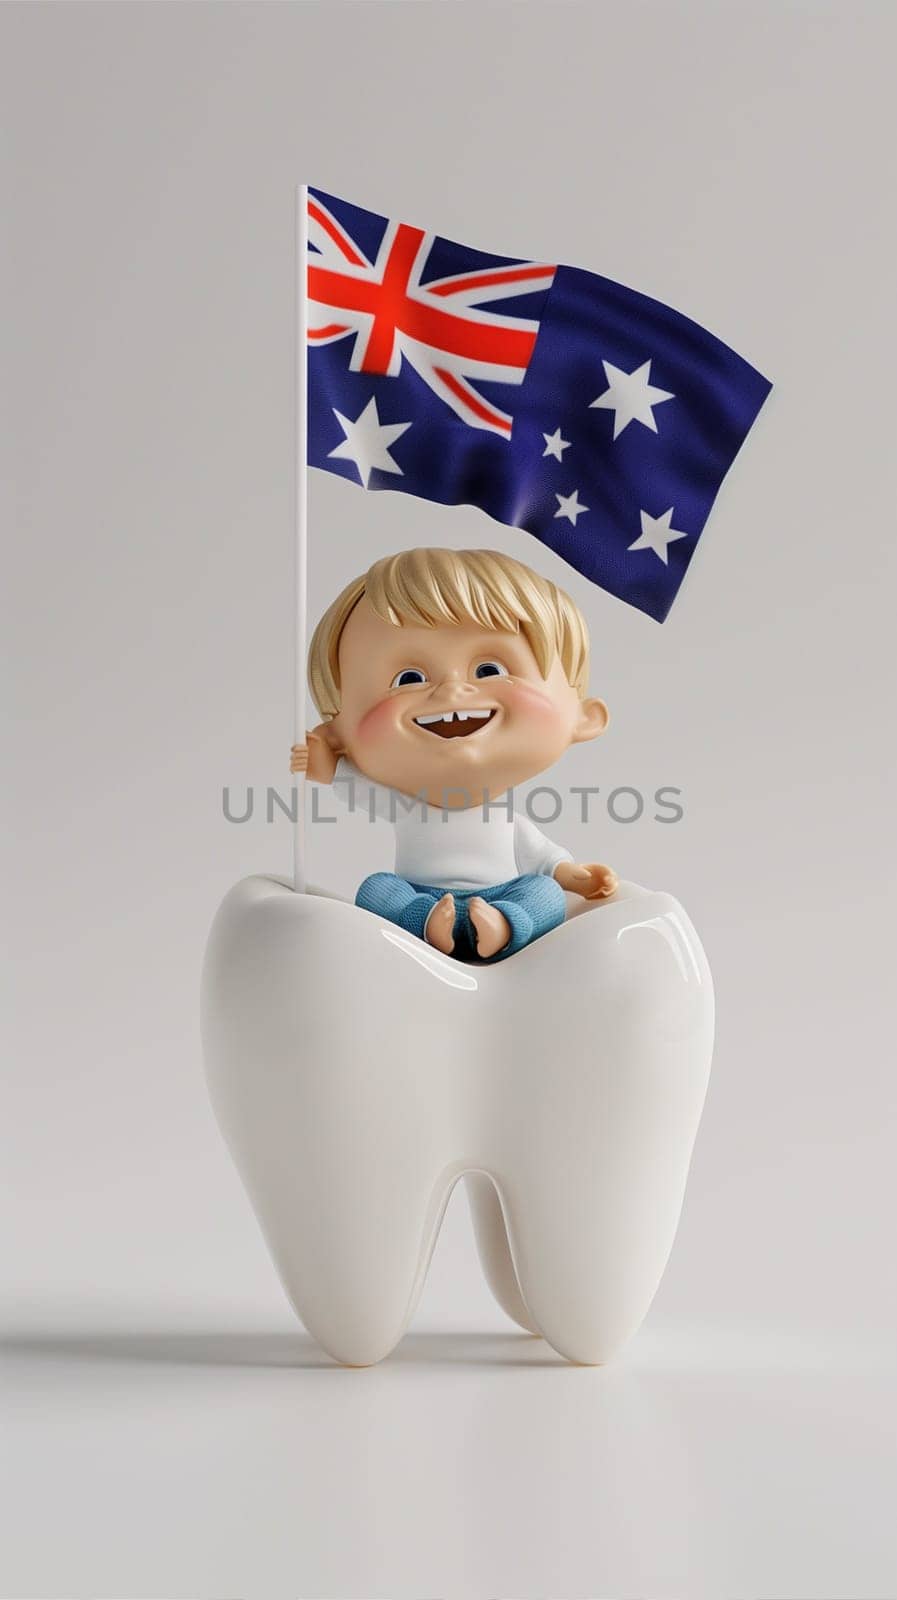 A child sits atop a tooth, proudly holding an Australian flag. Symbolizing patriotism and possibly a dental visit or tourism.